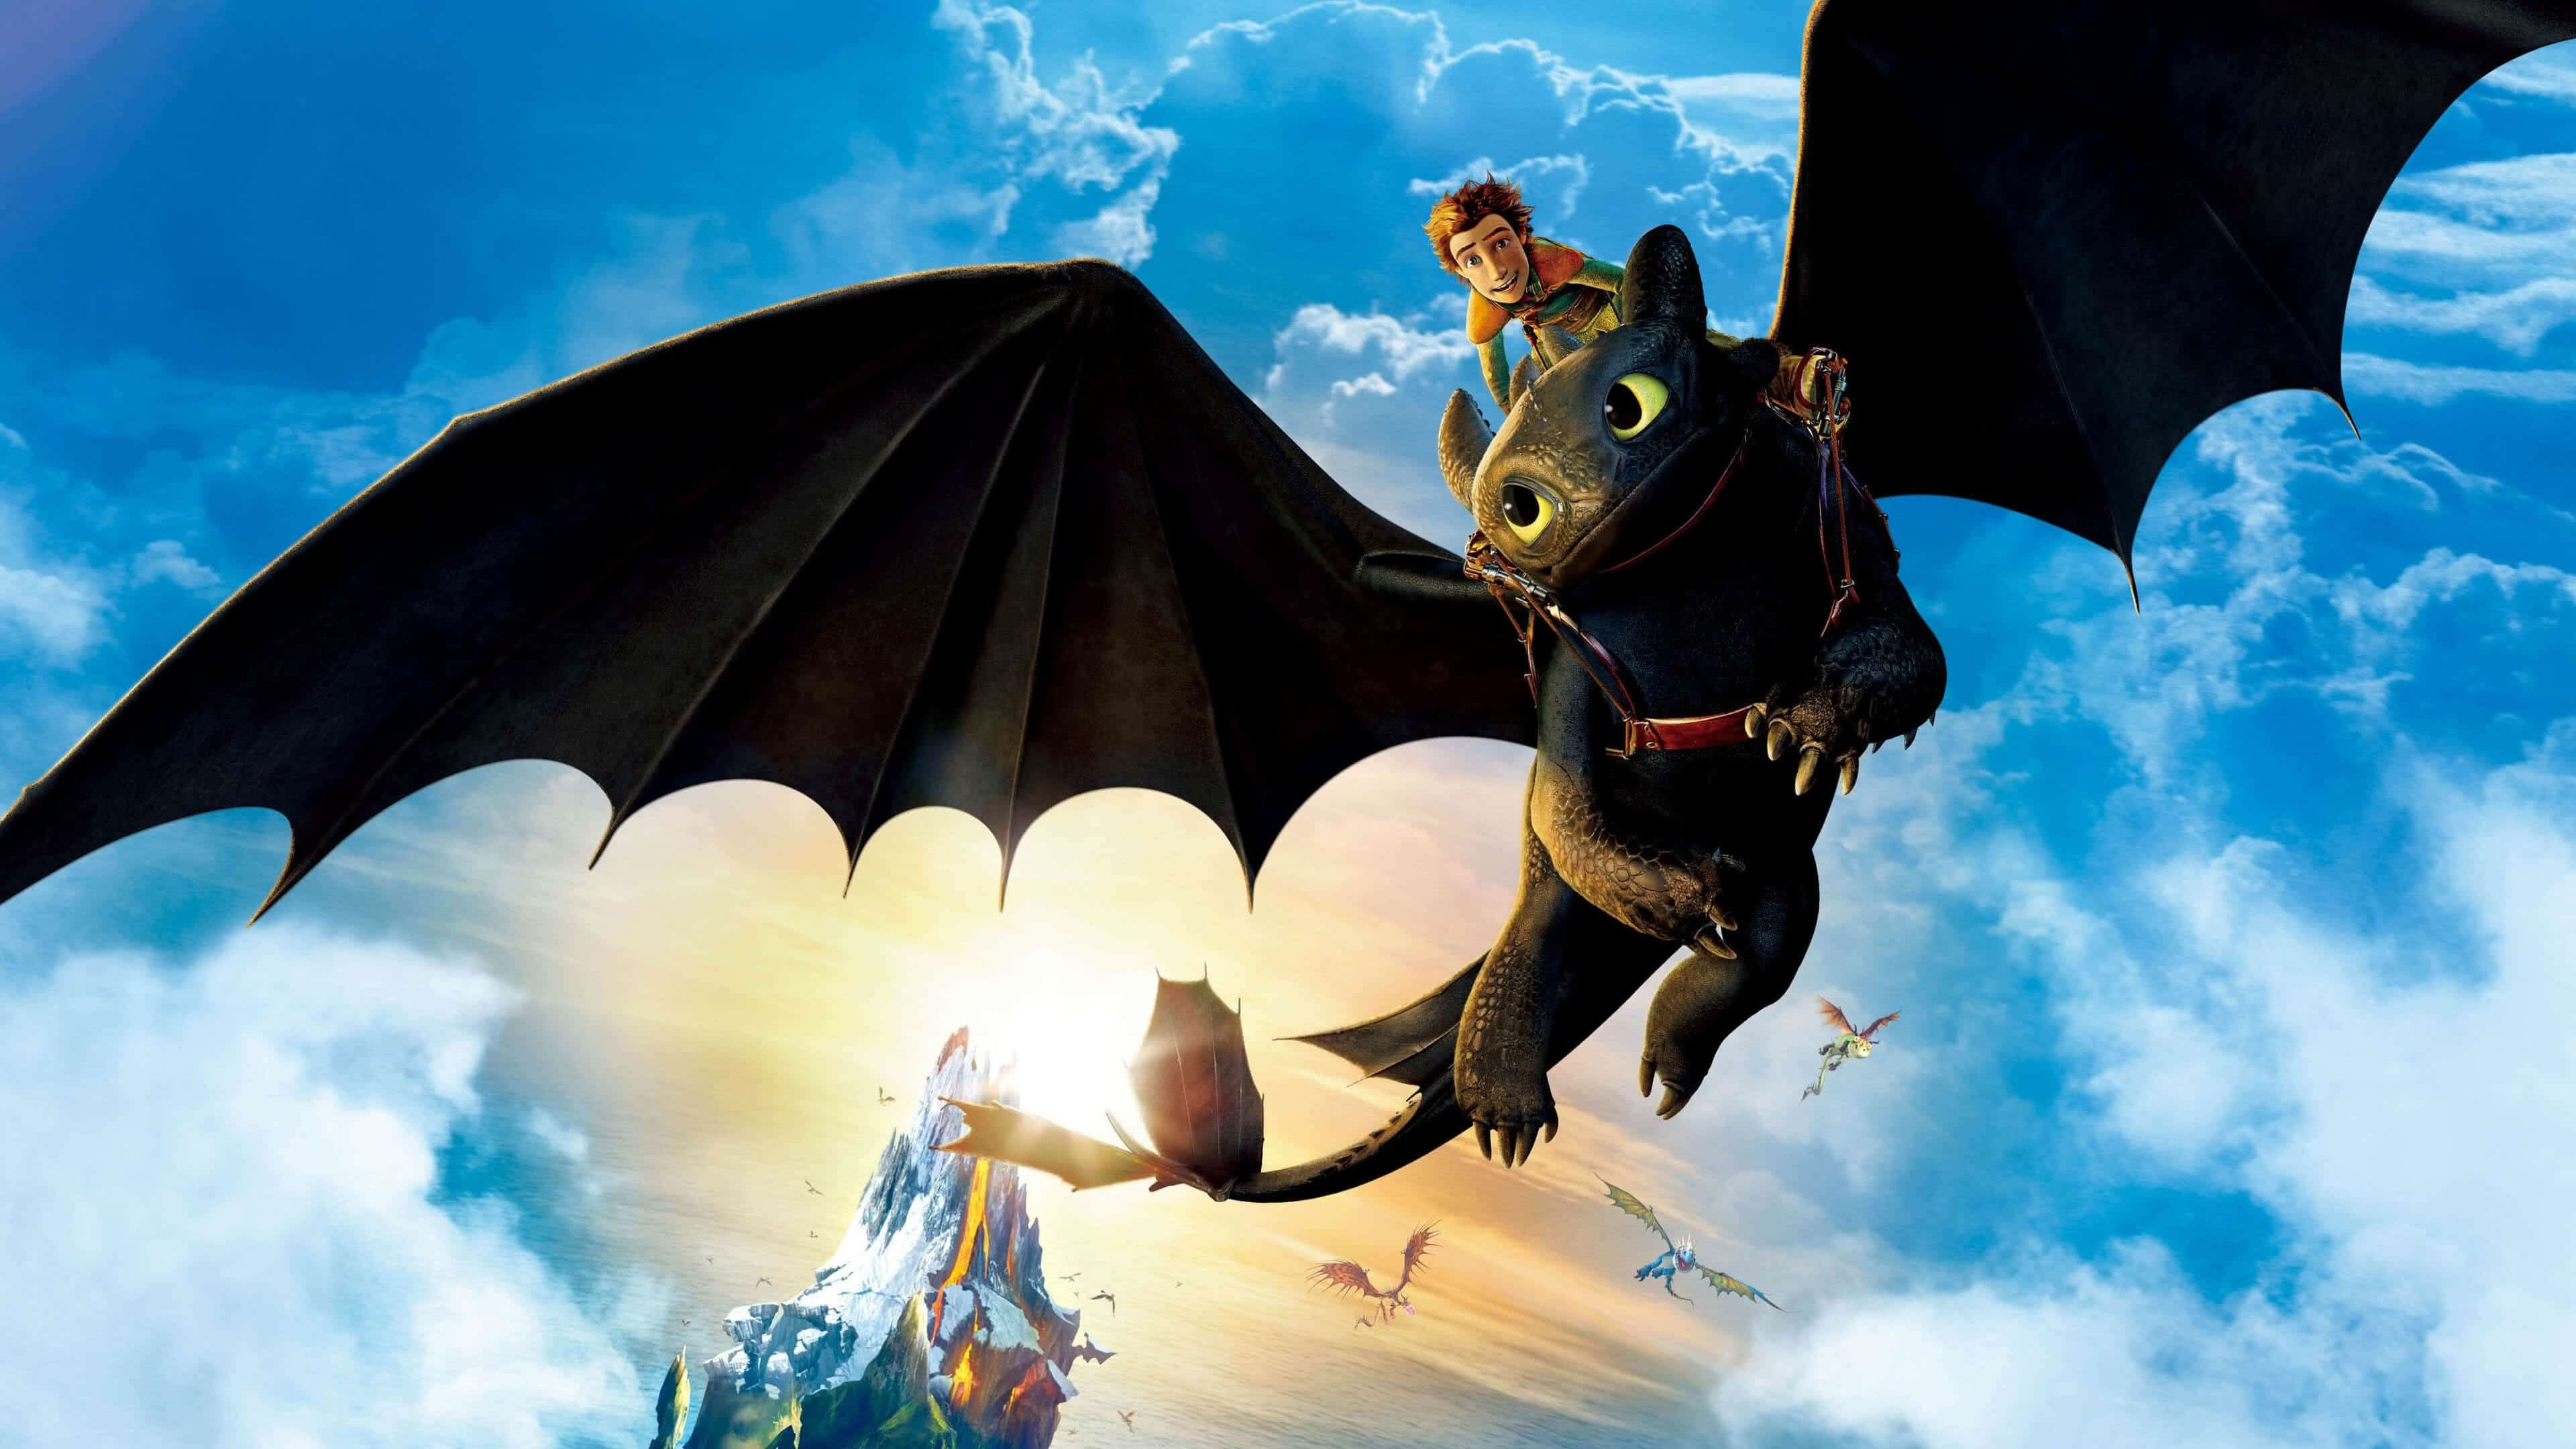 How to Train Your Dragon: The Hidden World wallpaper 3840x2160